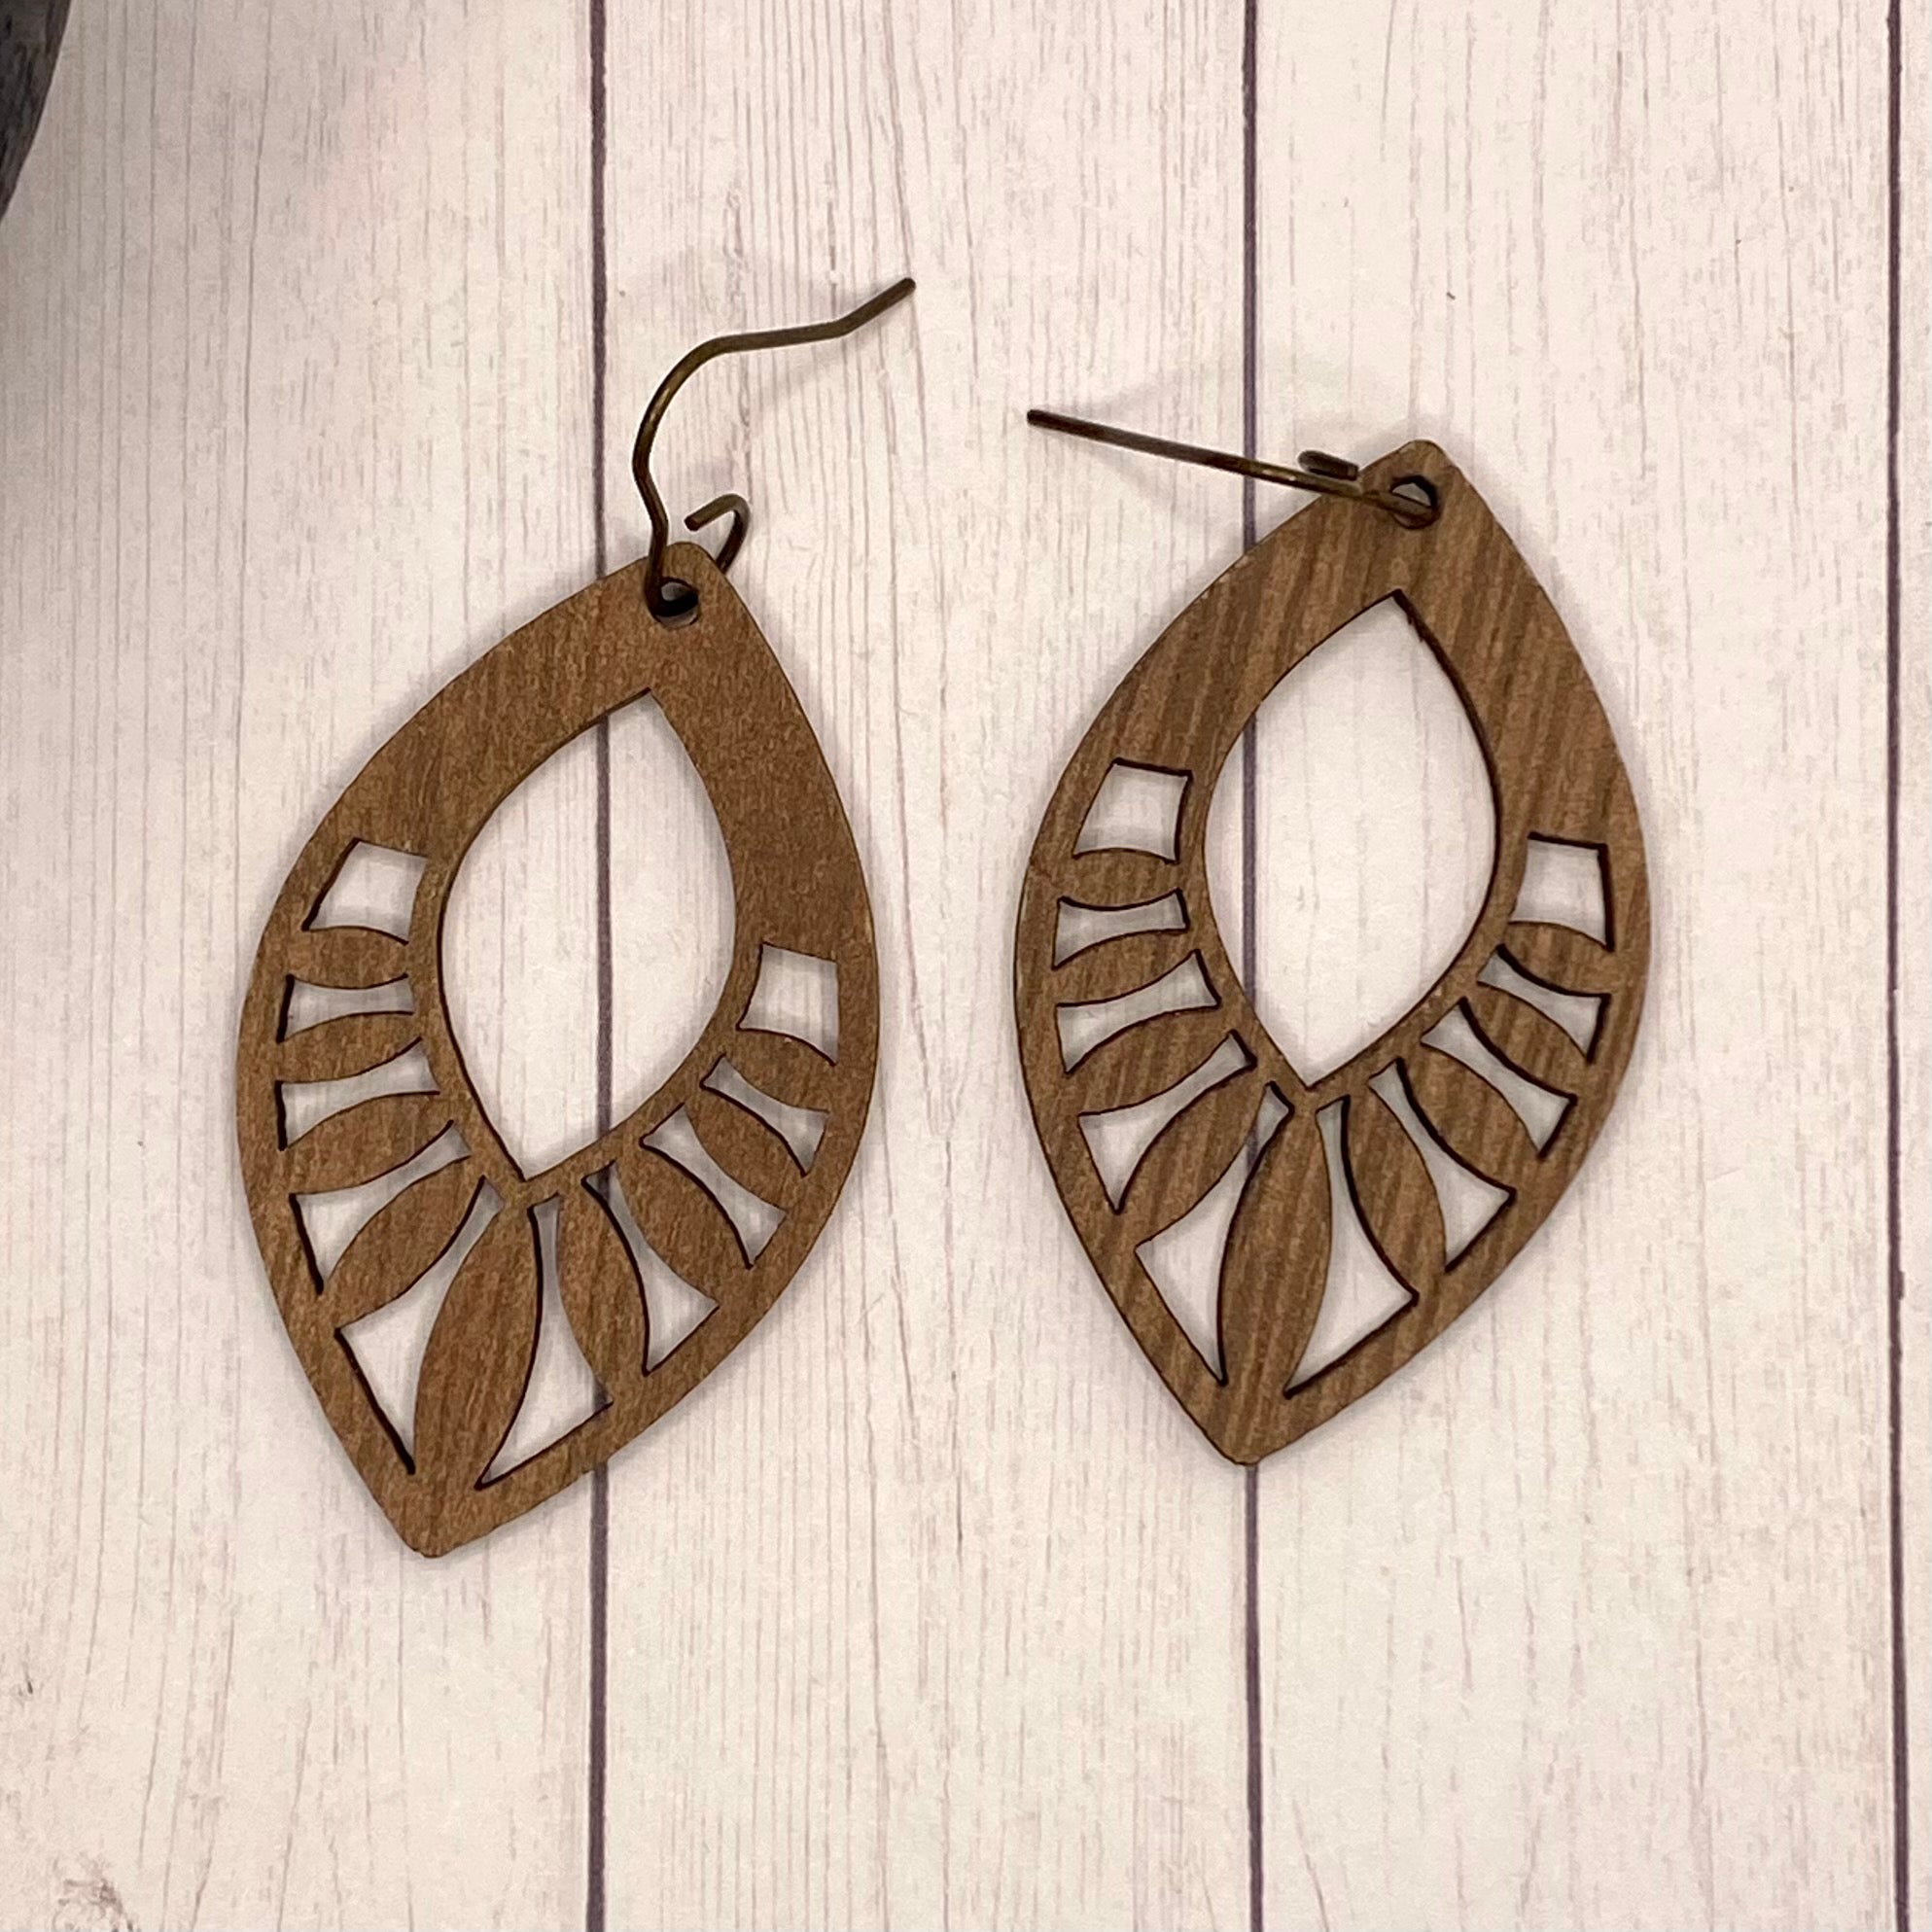 Sudarshana Chakra Wooden Earrings Laser Cut and Engraved Jewelry